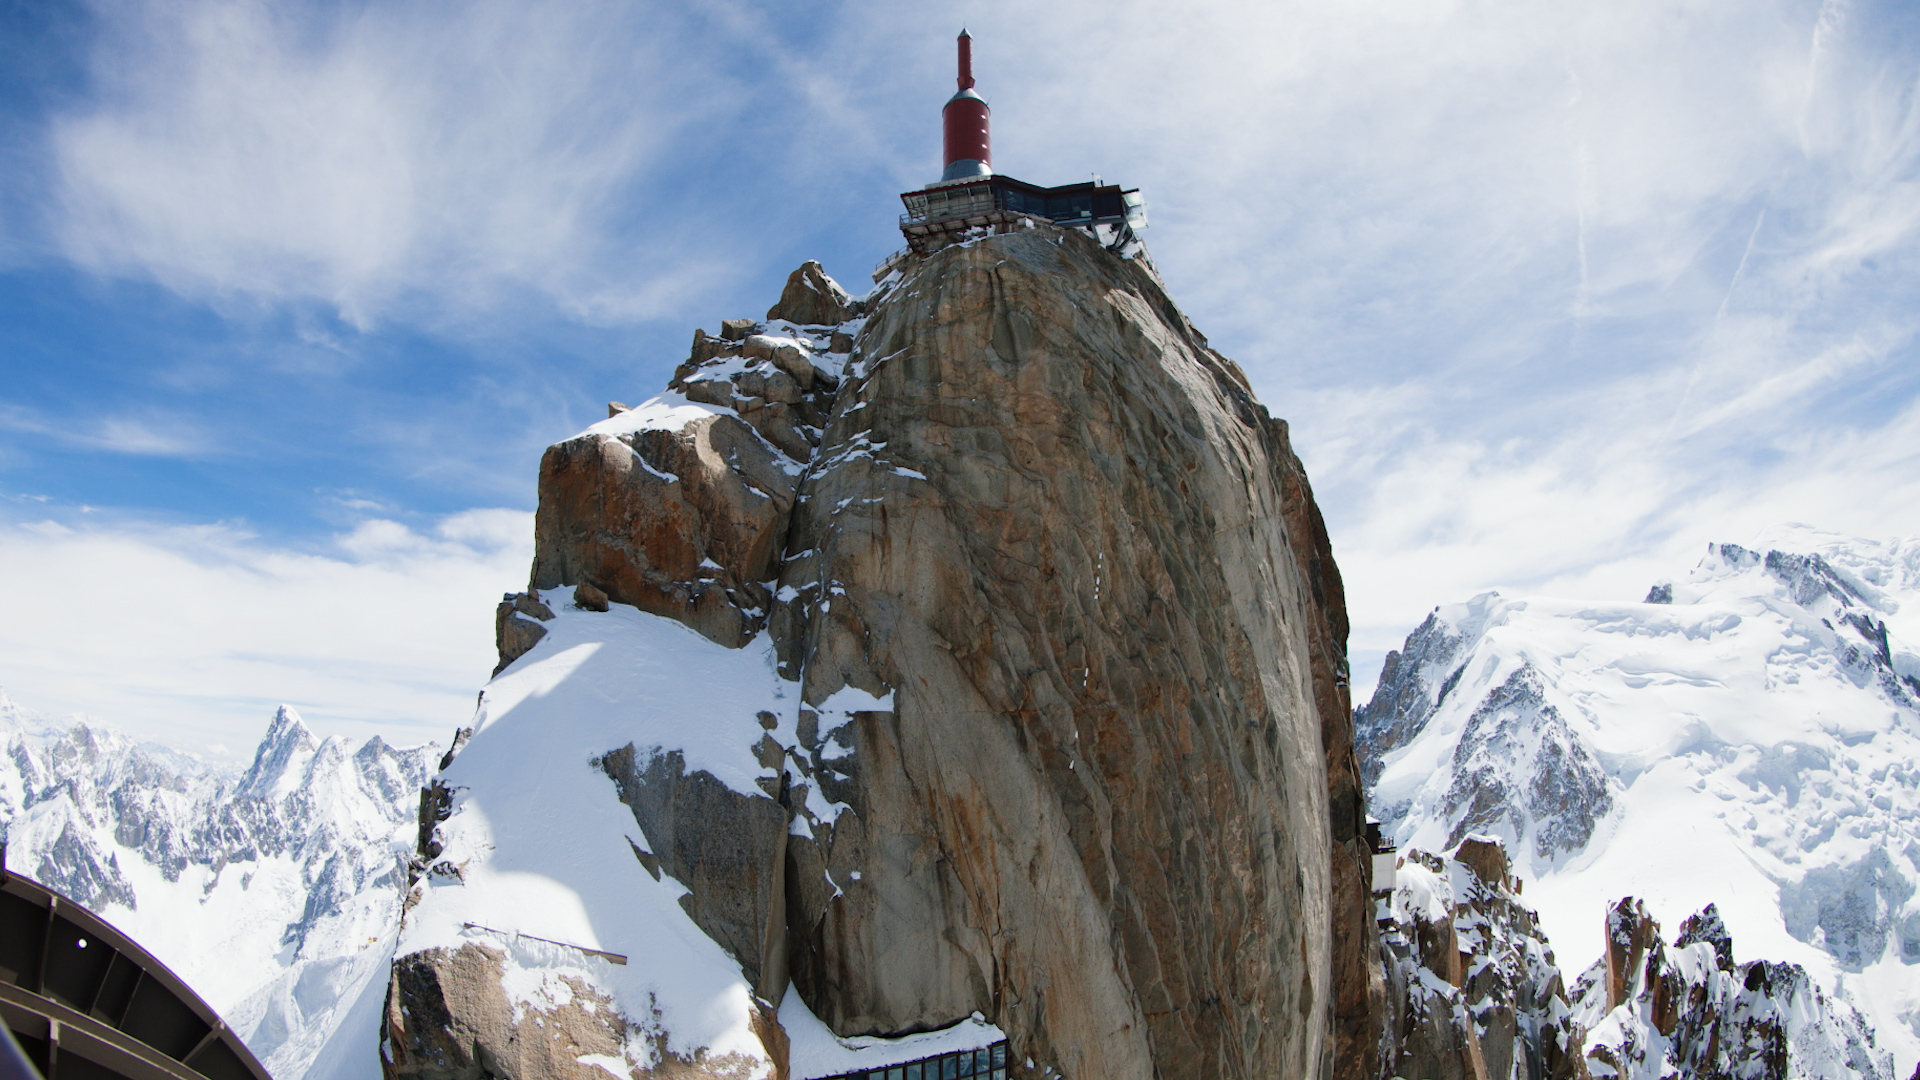 High above Chamonix, the needle of the Aiguille du Midi lift station sits in the sky at 3842m